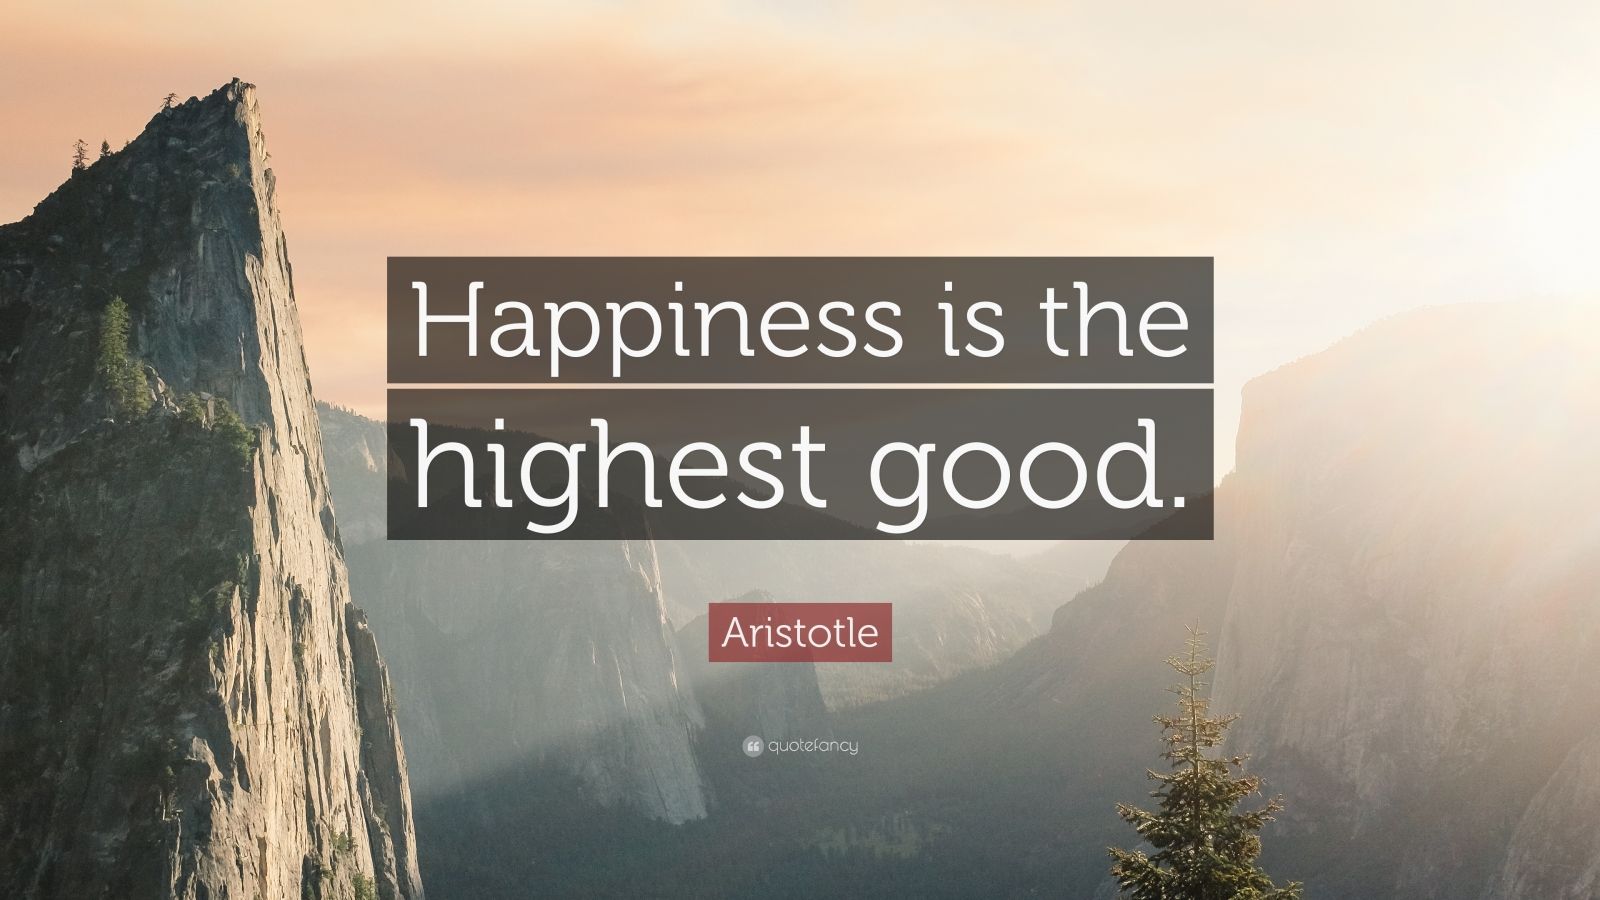 Aristotle Quote: “Happiness is the highest good.” (12 wallpapers ...